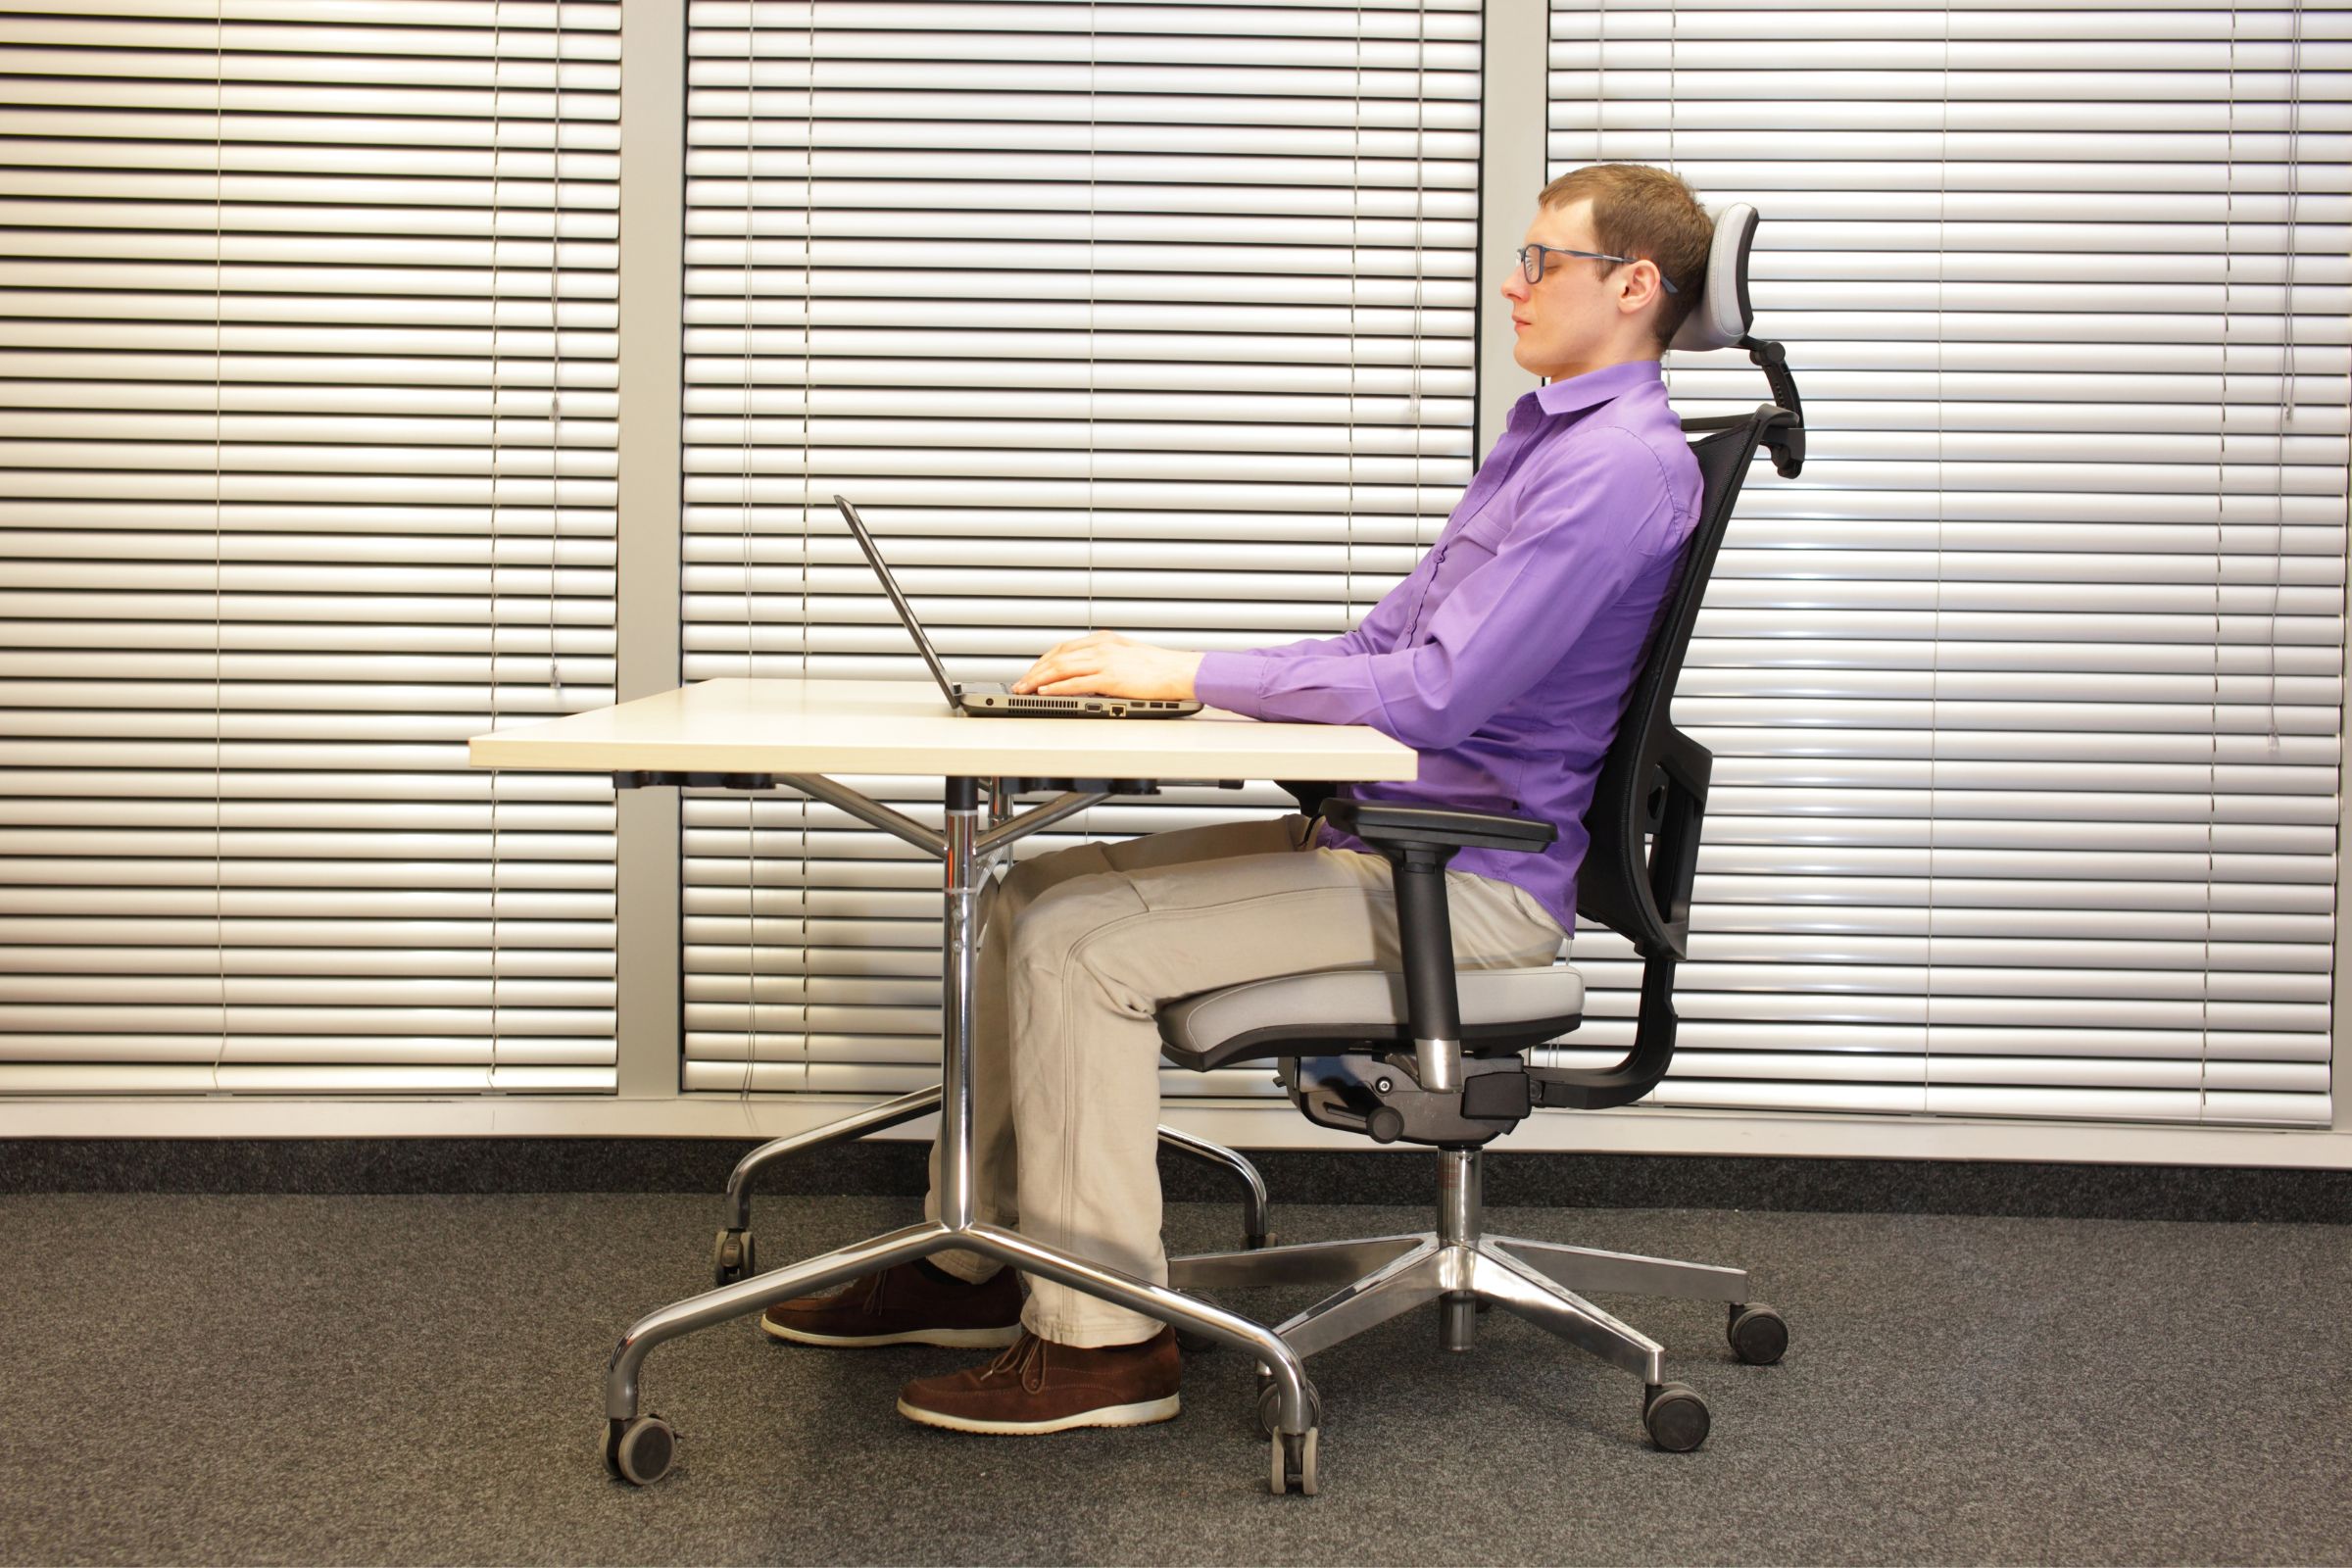 Chairs for Posture: Why We Need a Good Chair